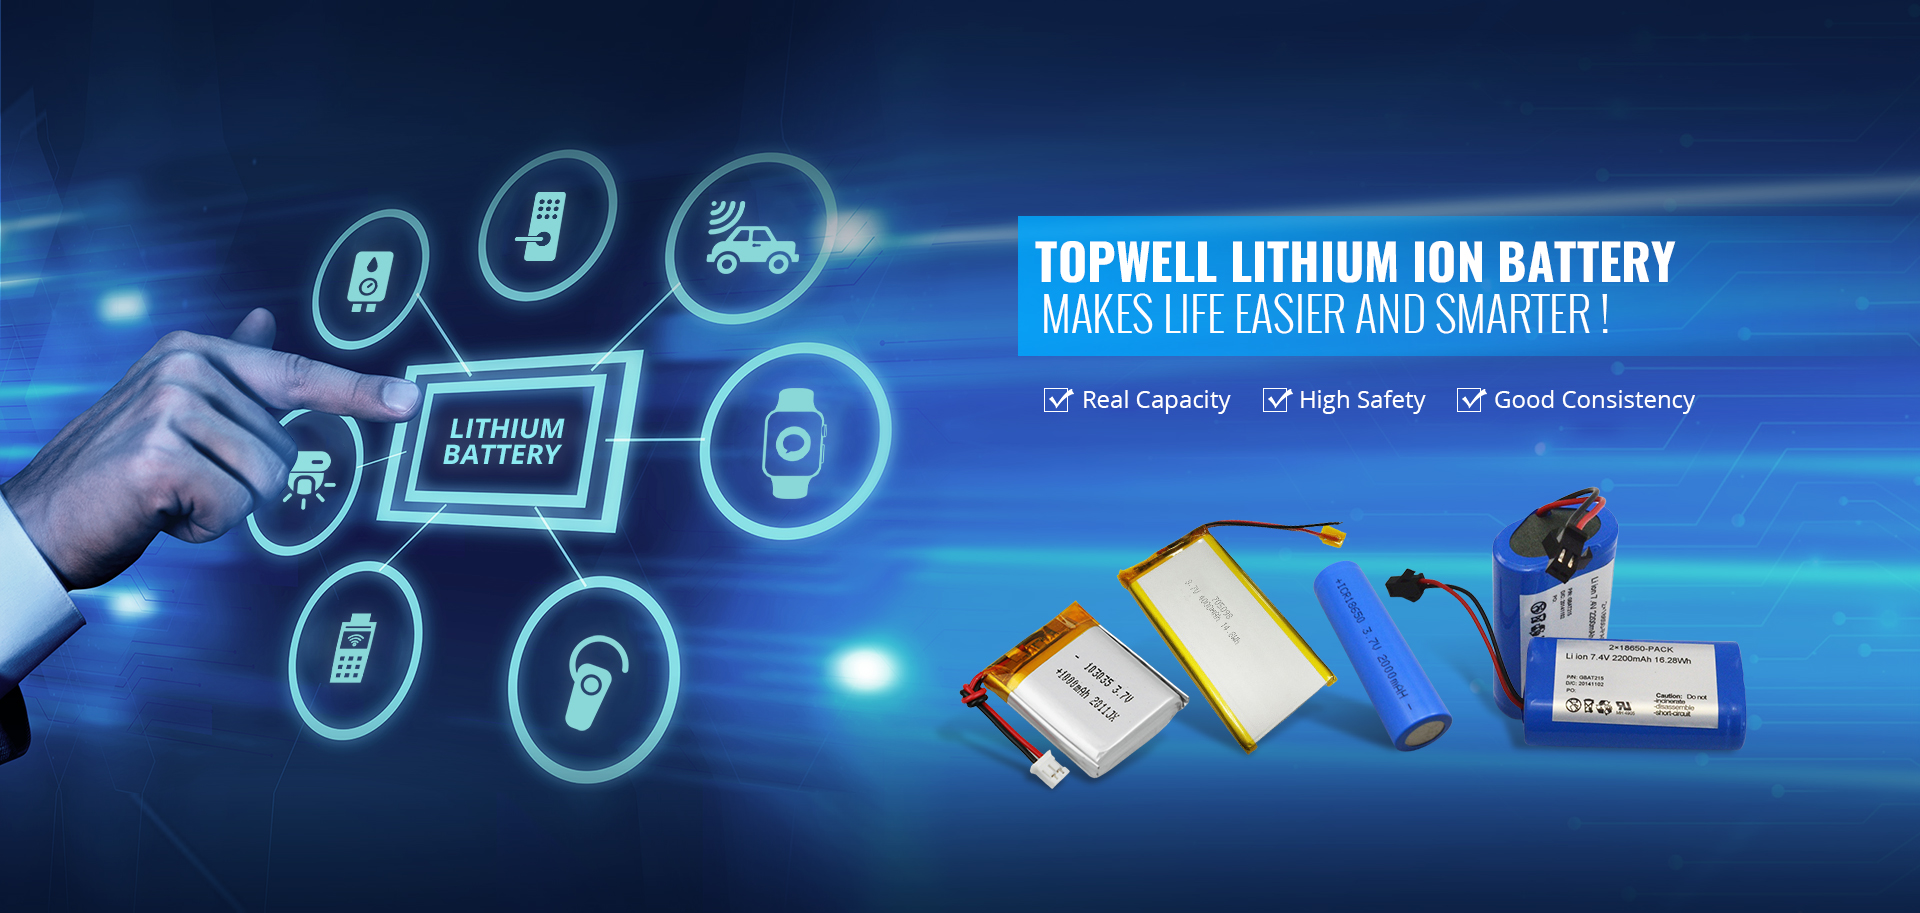 lithium ion battery lithium polymer battery for IOT devices for smart home